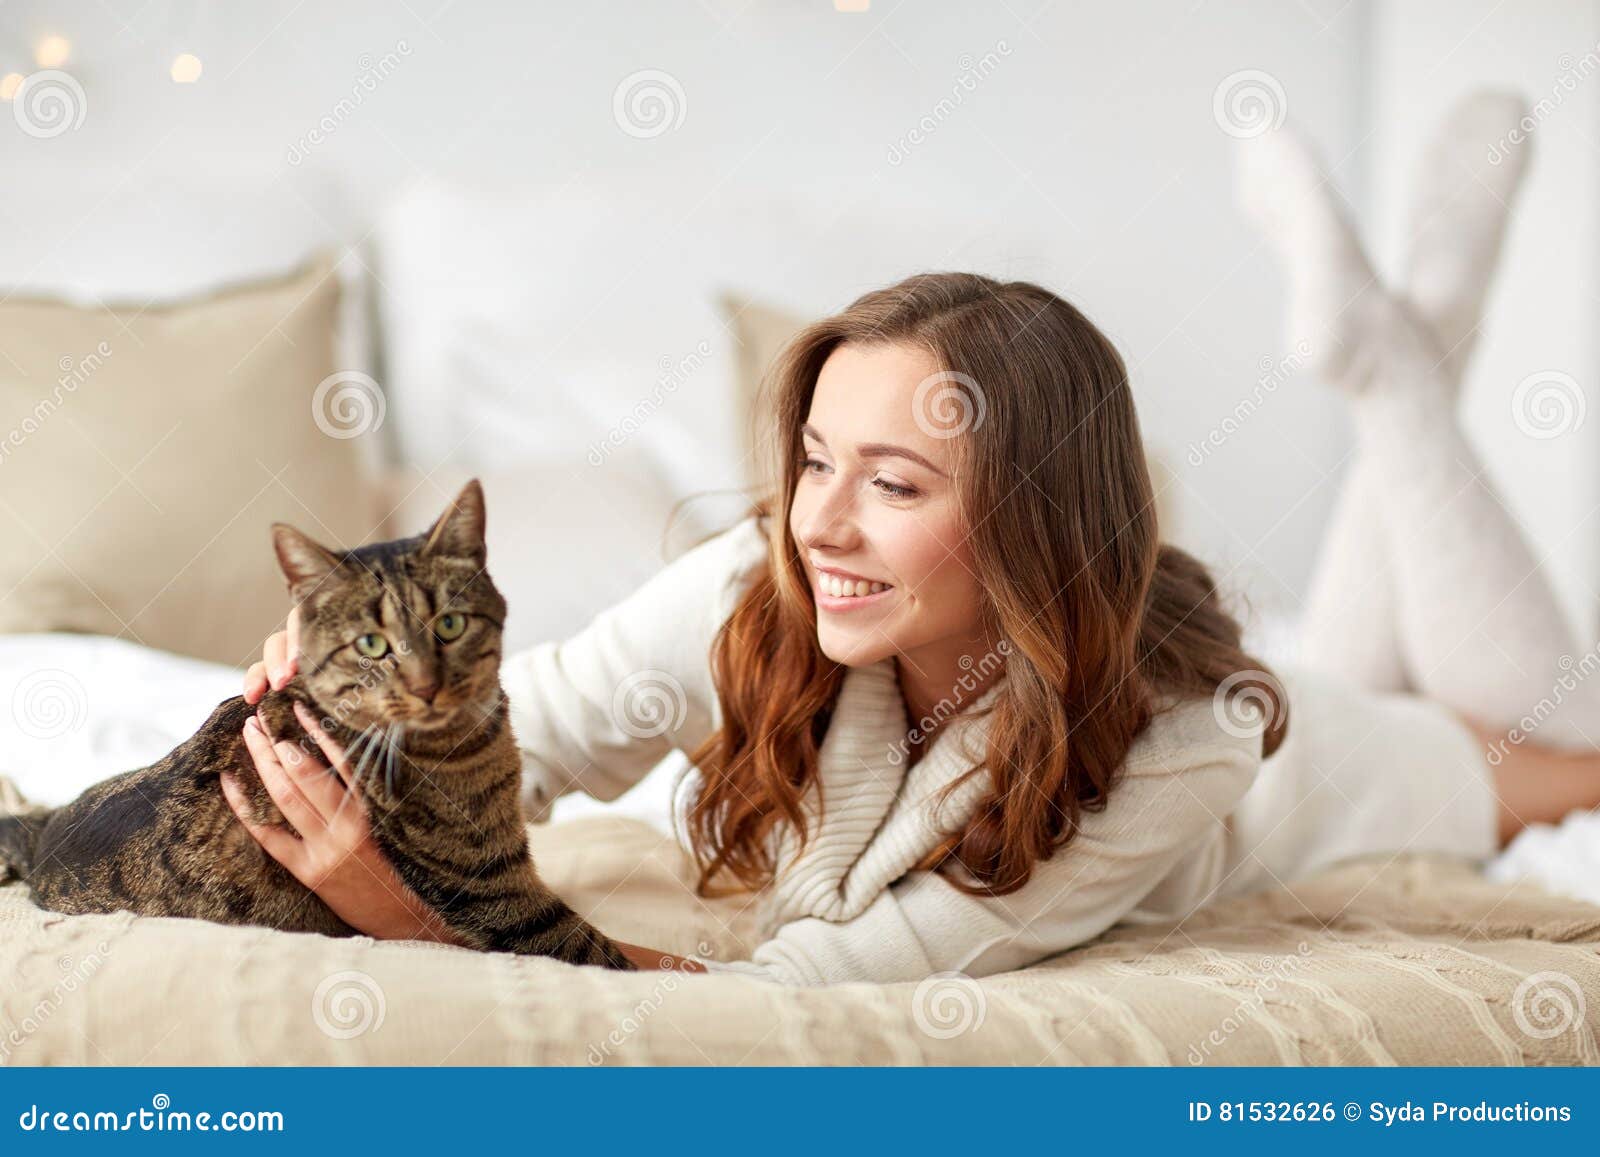 Happy Young Woman with Cat Lying in Bed at Home Stock Photo - Image of ...